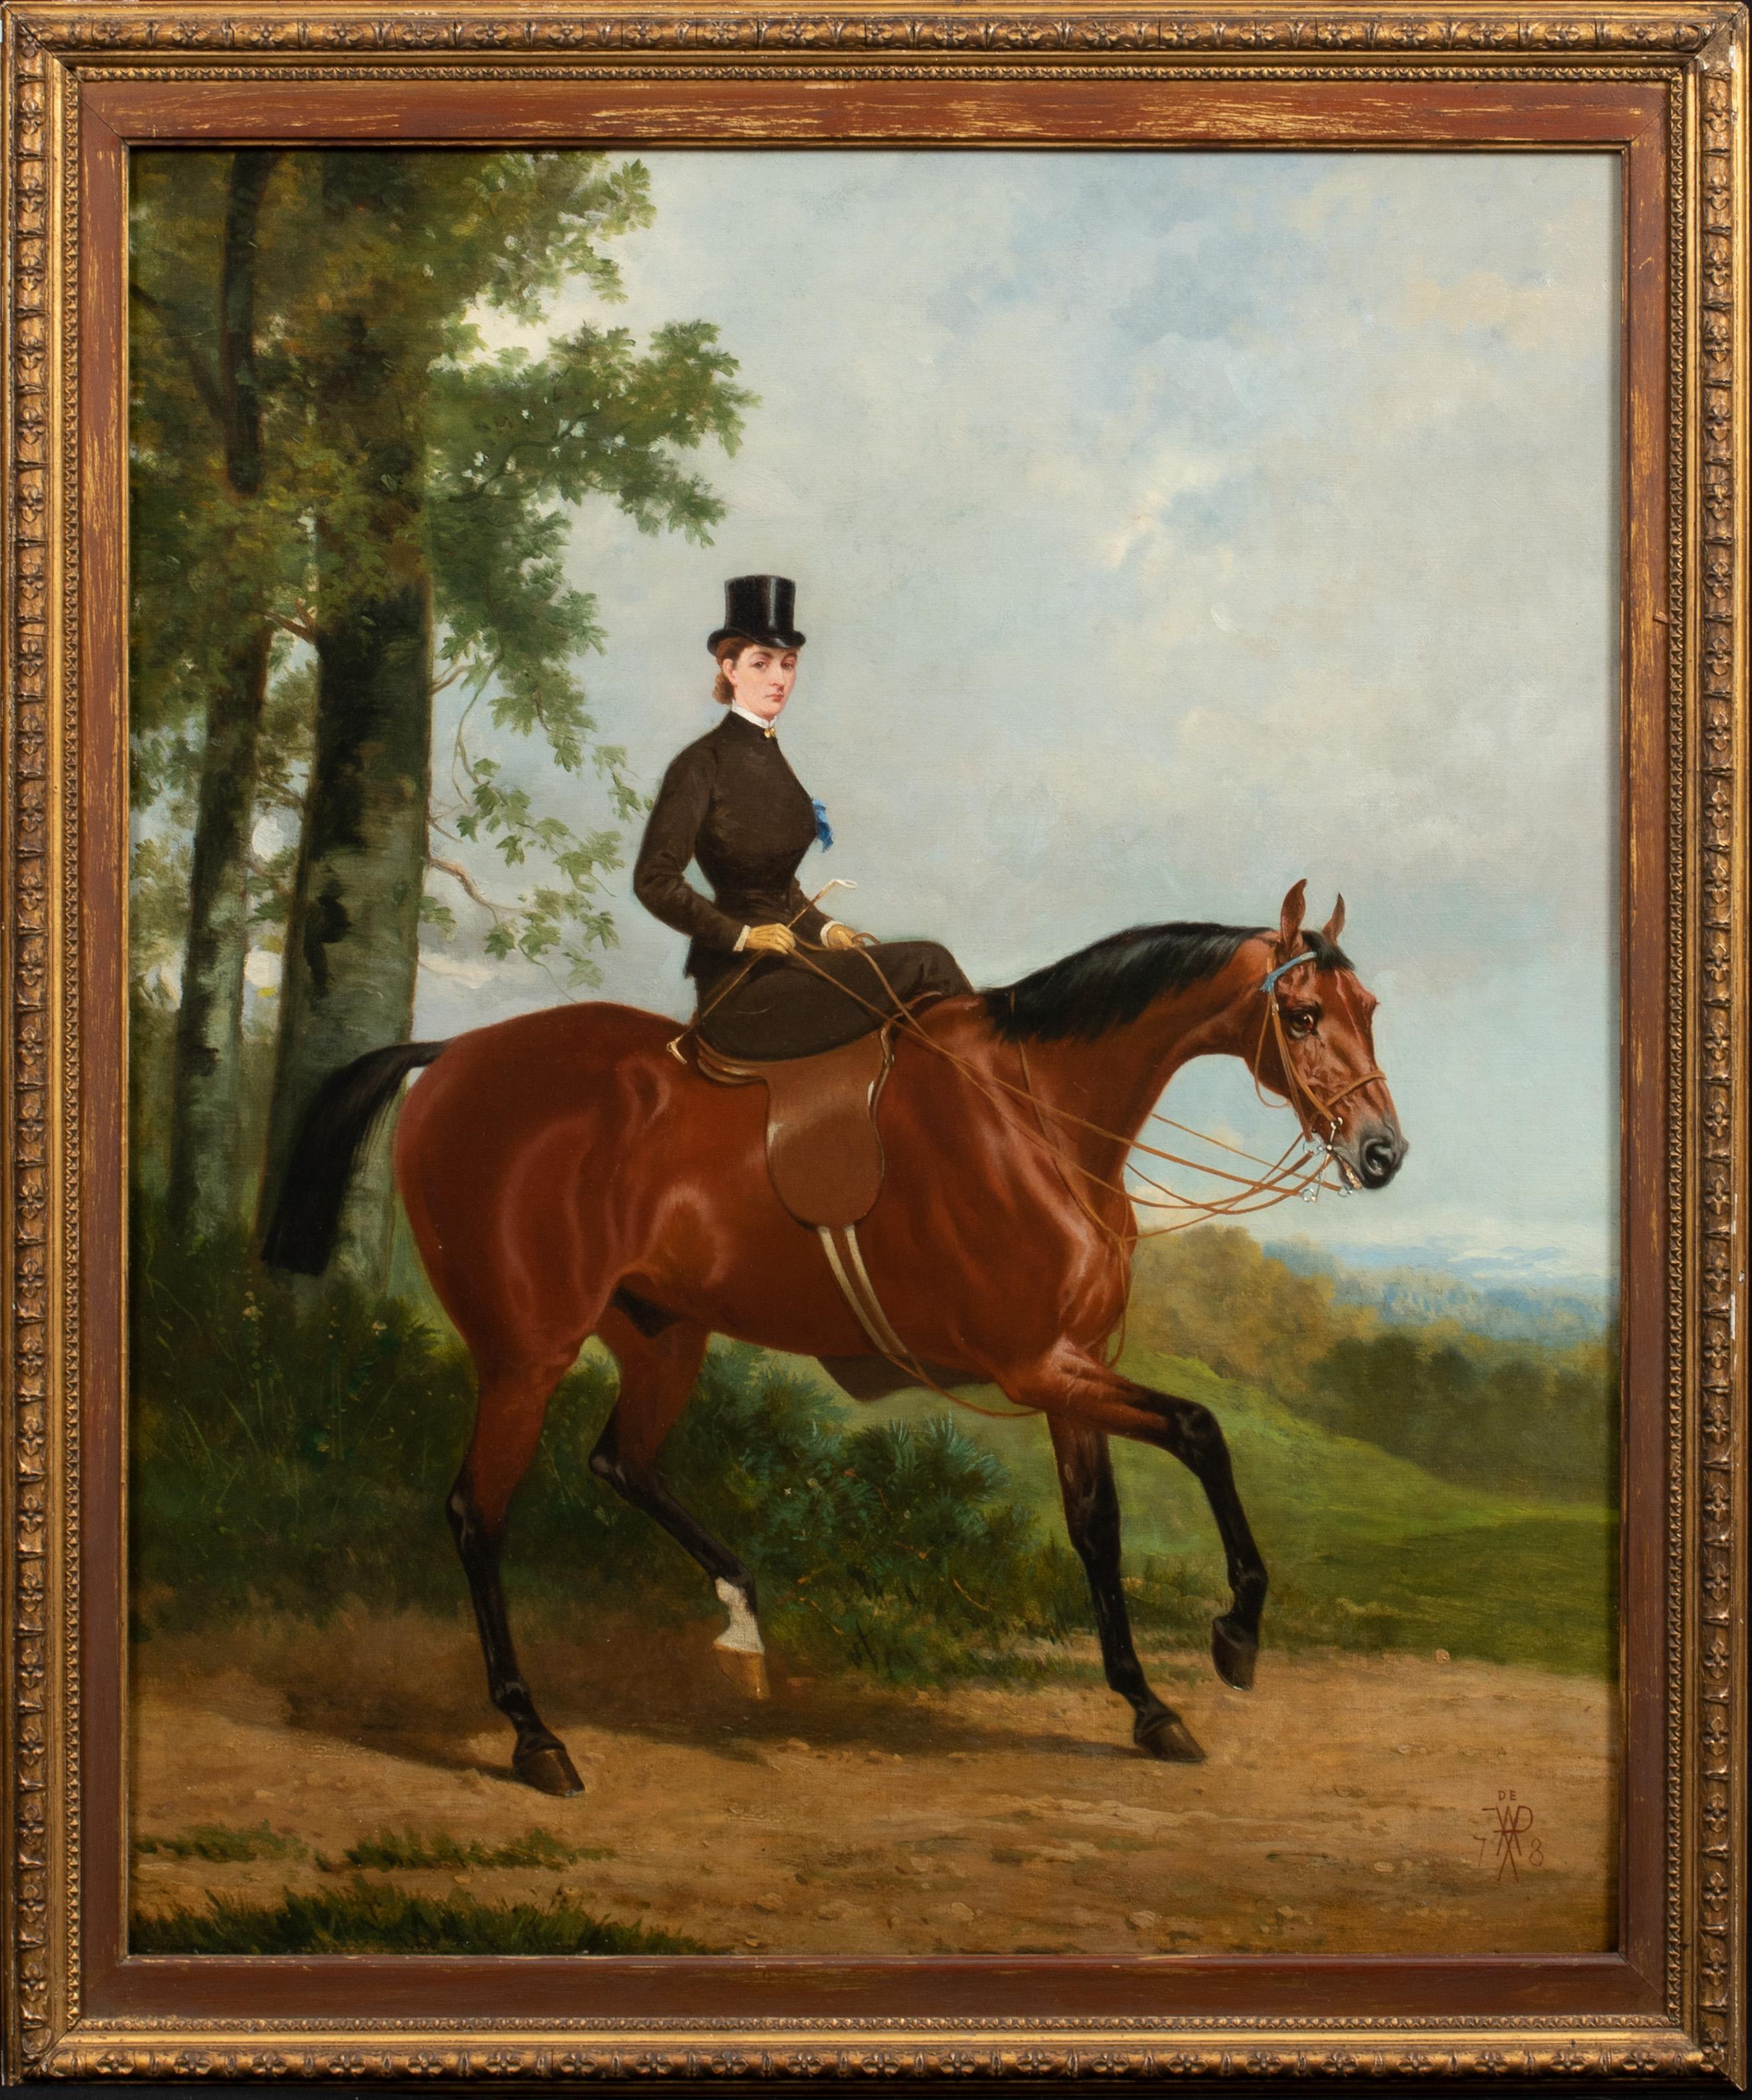 Portrait Of A Lady, said to be Mrs Clifton, Riding Sidesaddle, 19th Century  - Painting by Alfred De Prades